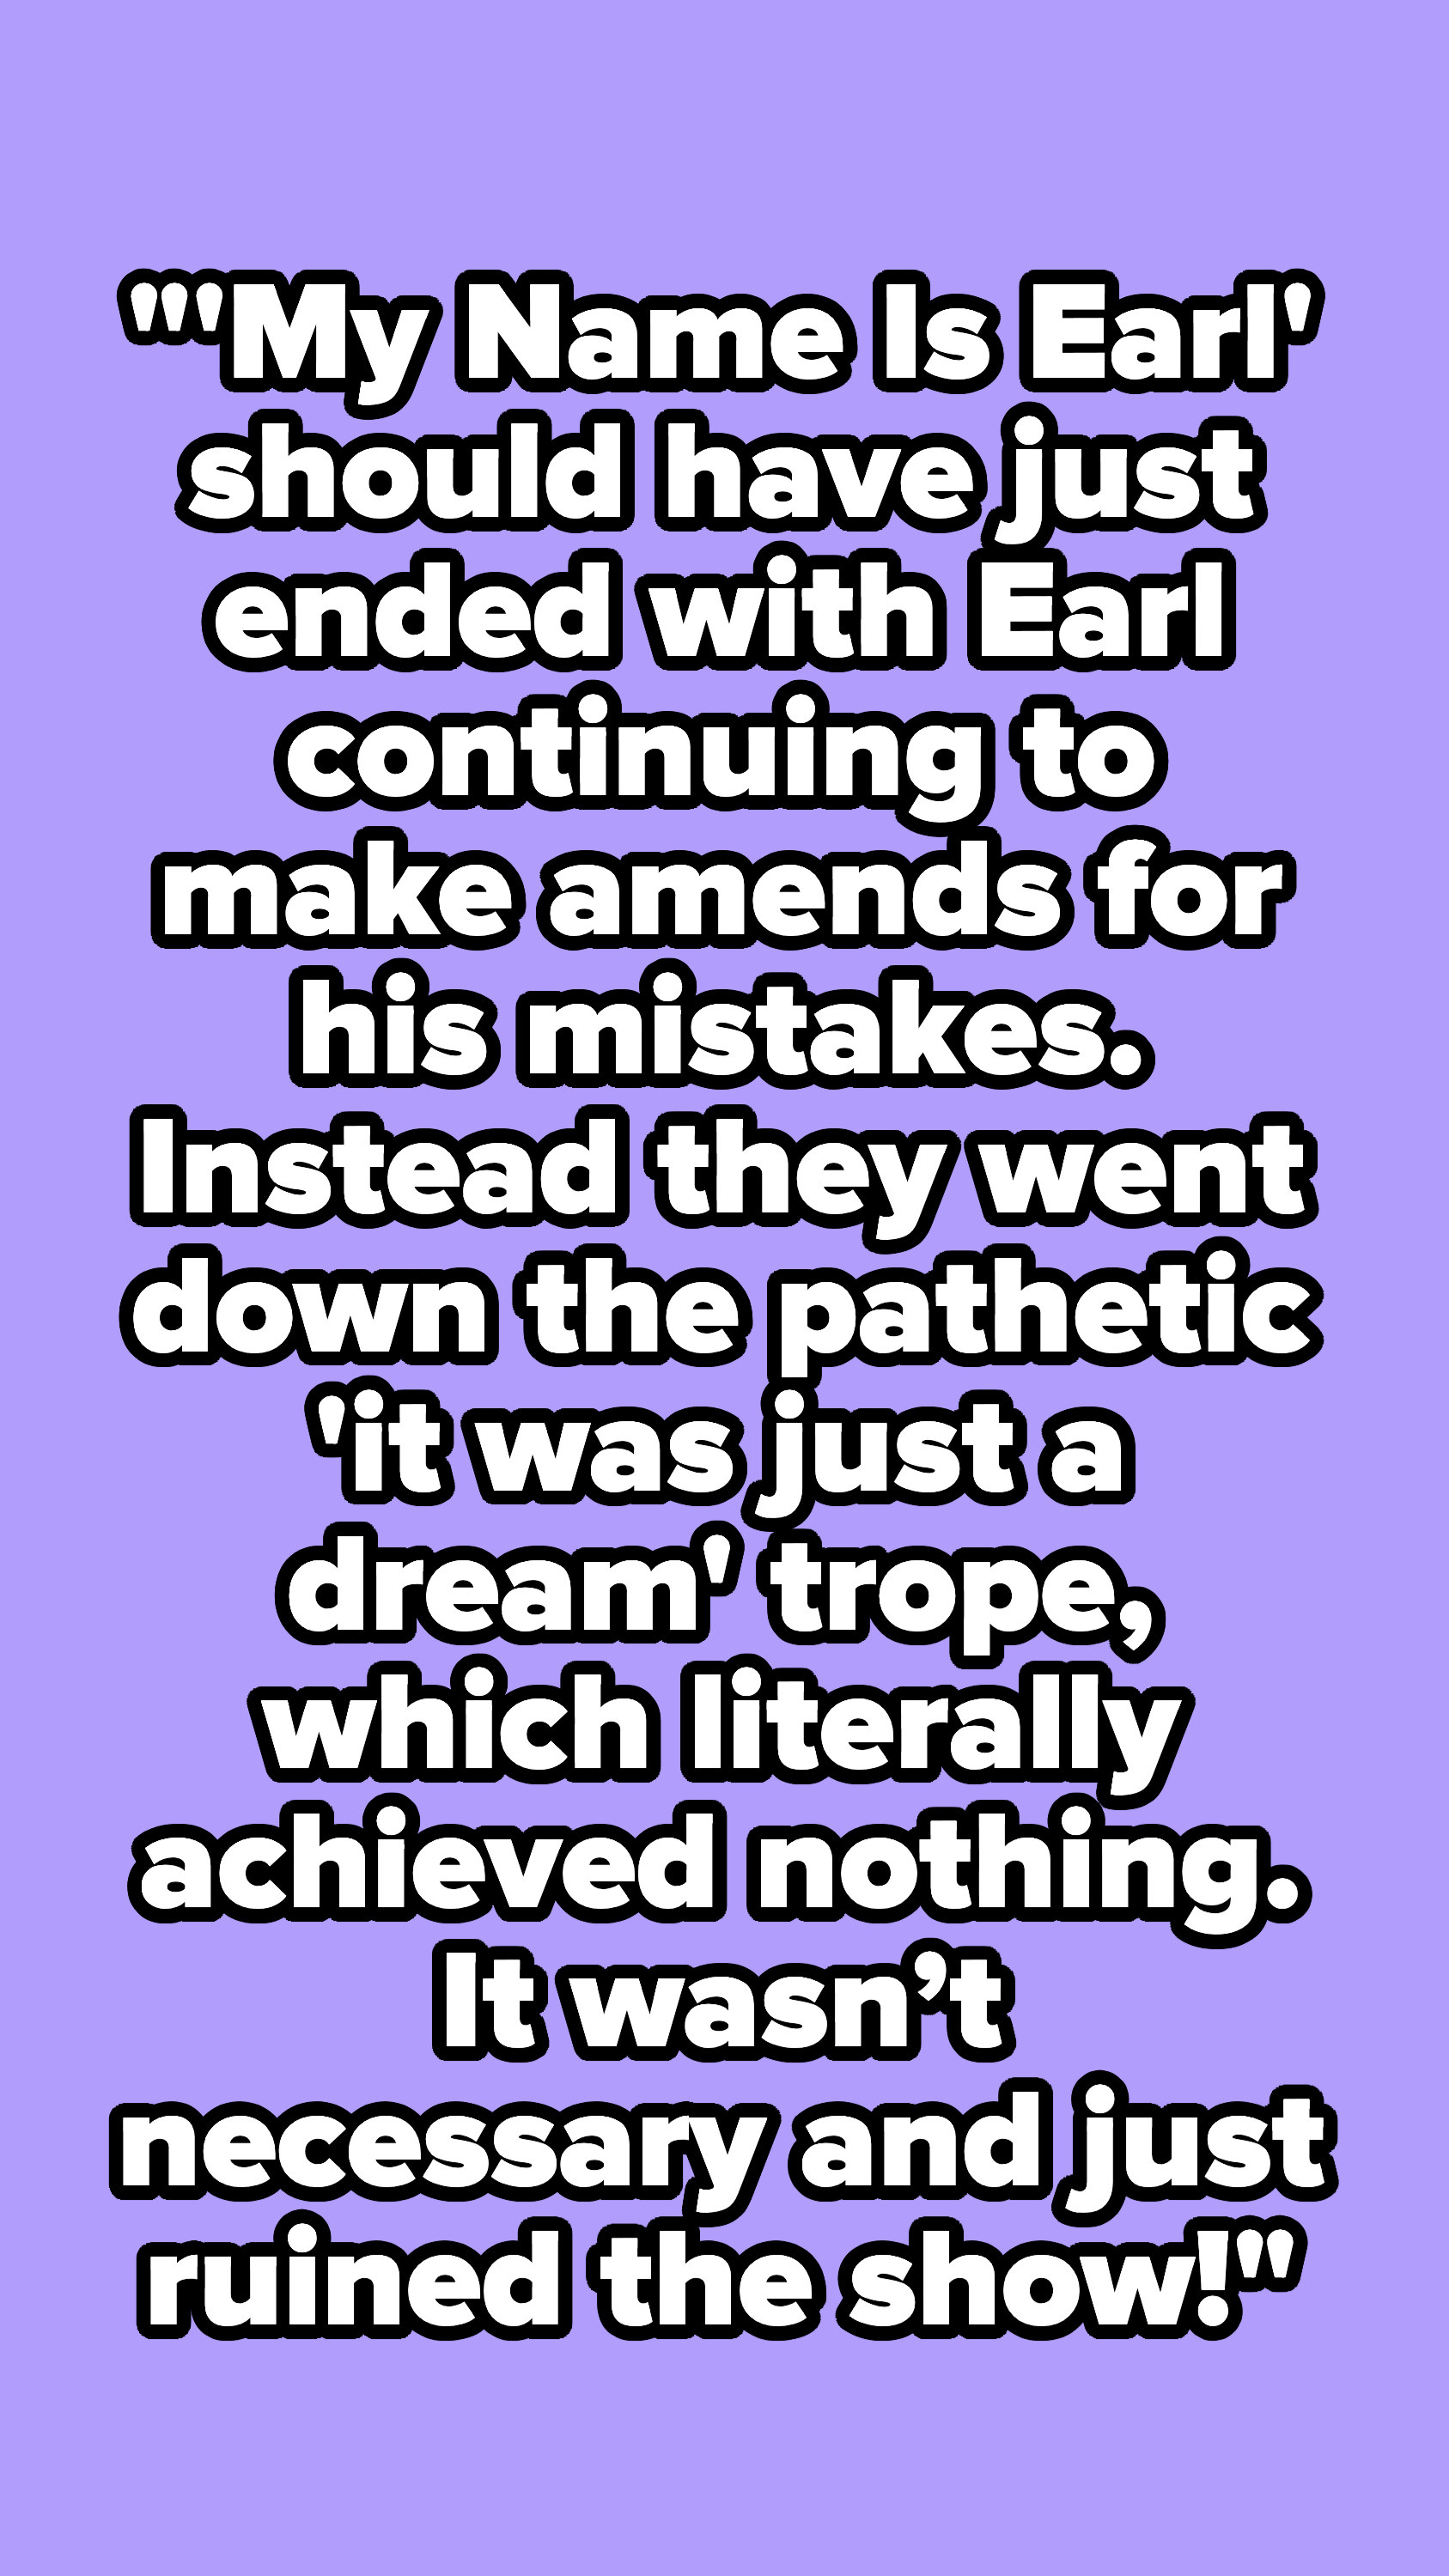 &quot;&#x27;My Name Is Earl&#x27; should have just ended with Earl continuing to make amends for his mistakes.&quot;